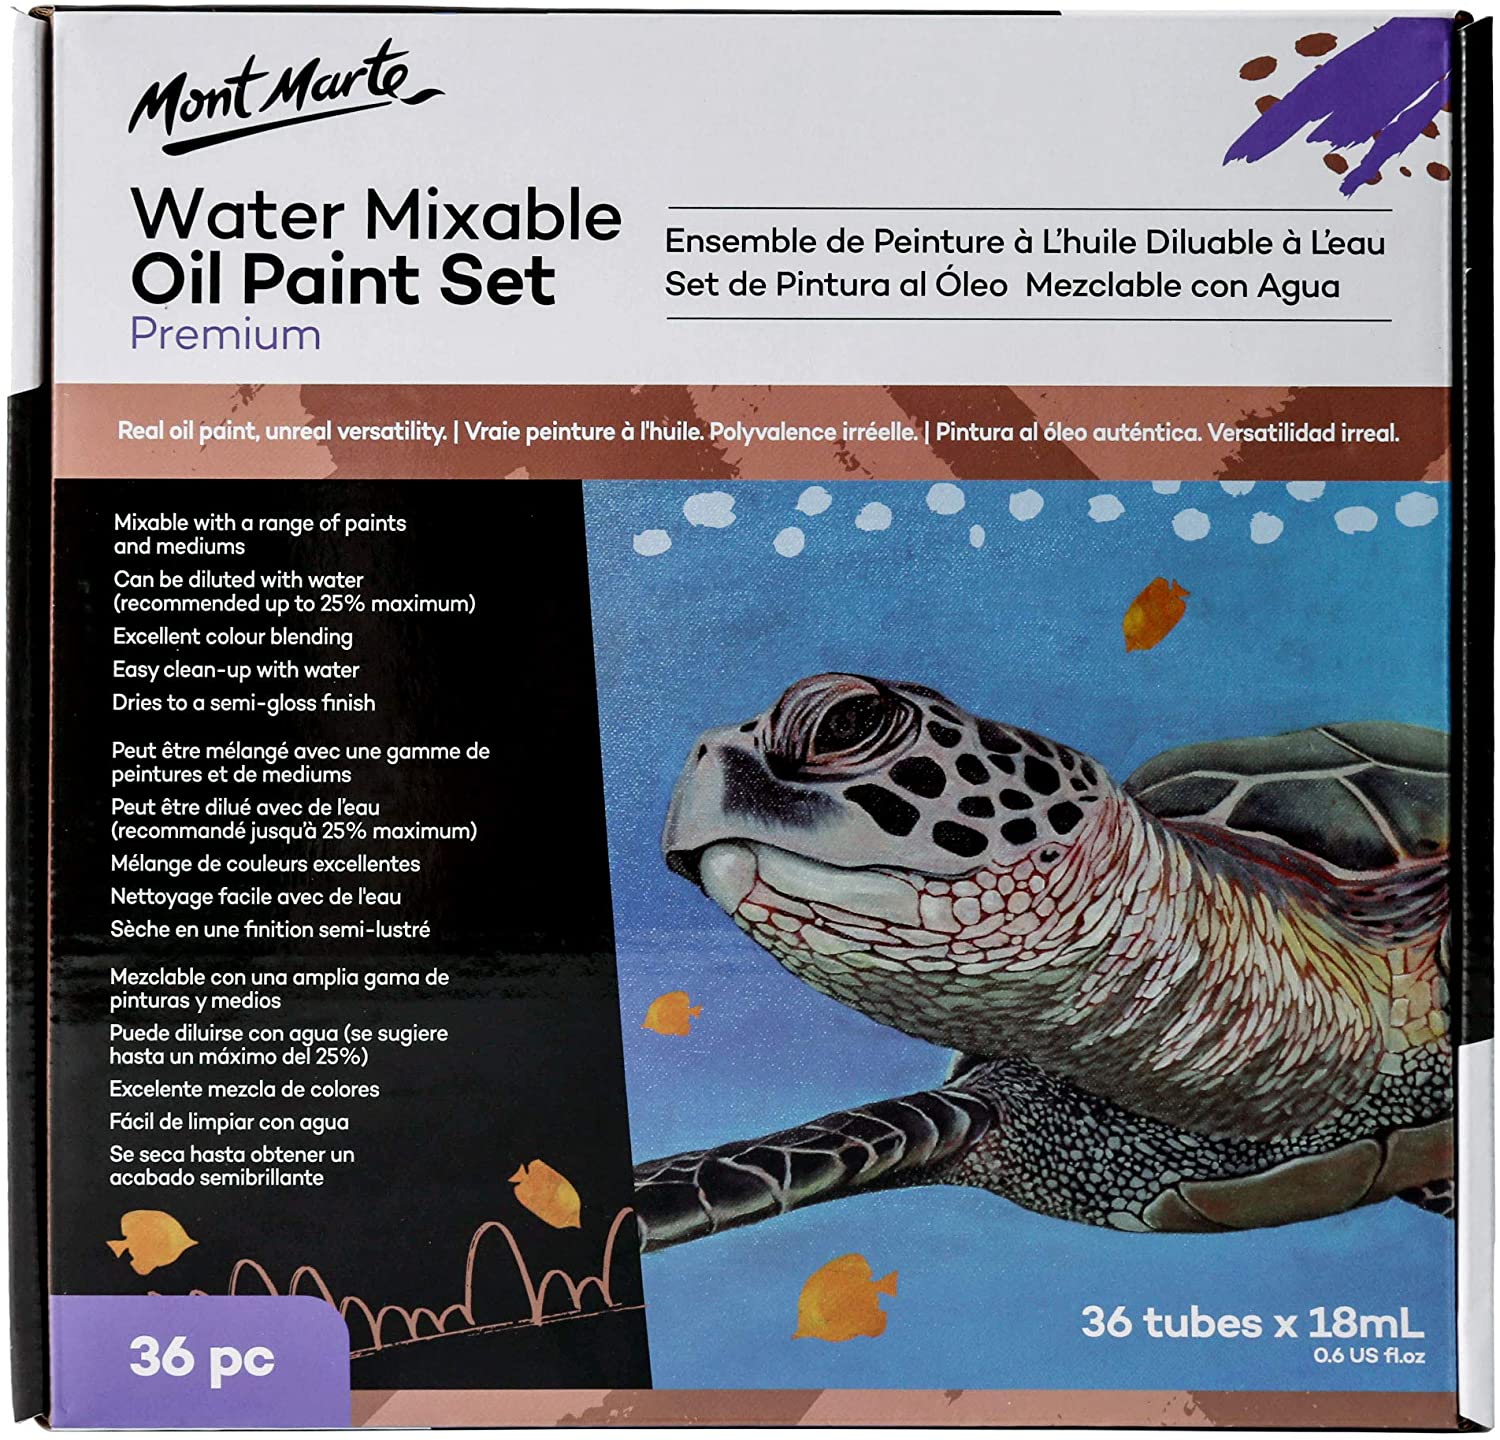 Mont Marte H2O Water Mixable Oil Paint Set back